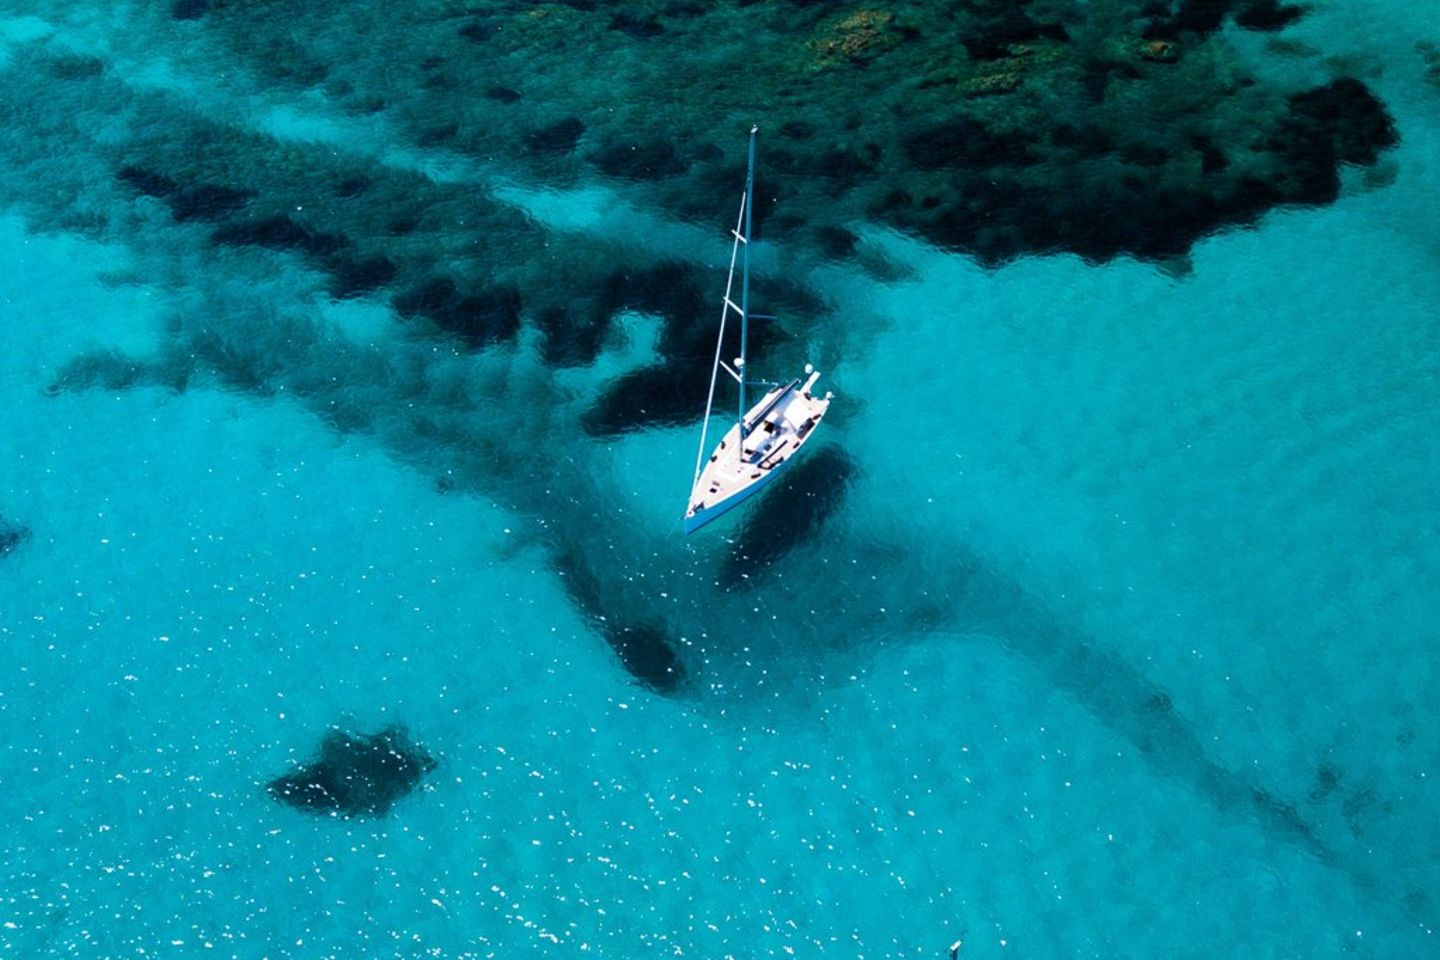 Celebrities can often be found where luxury yachts rock in crystal-clear water.